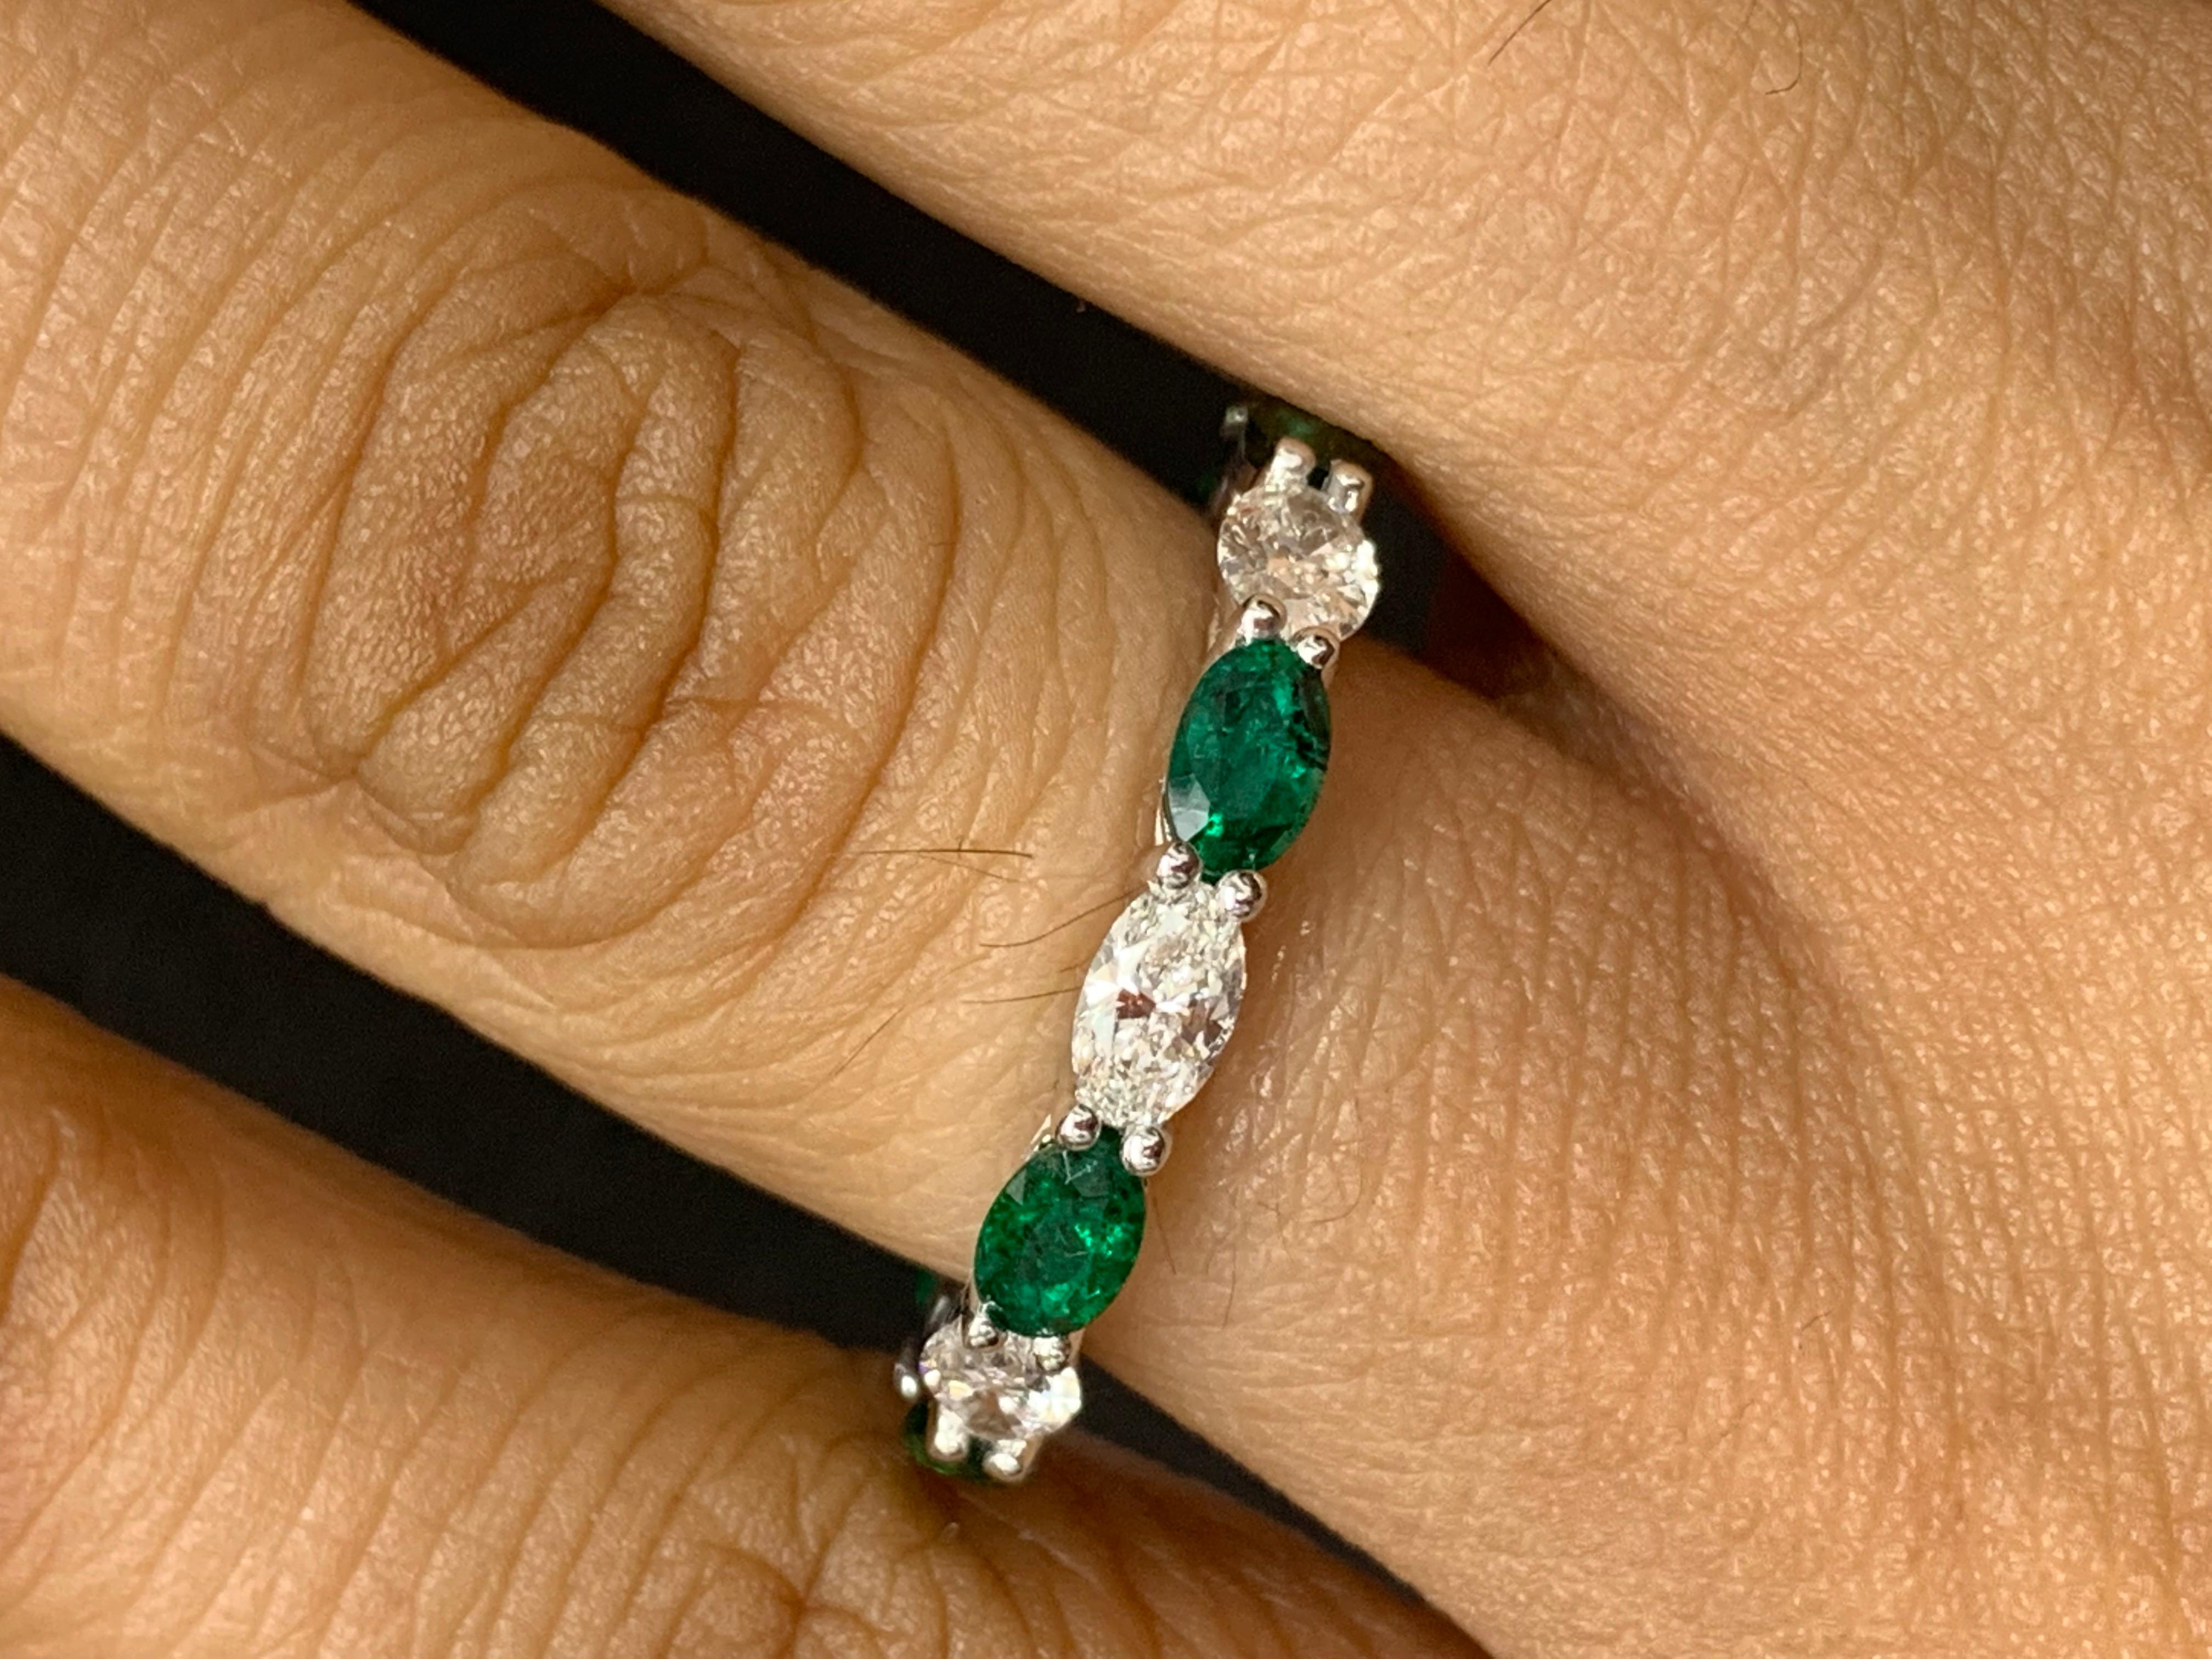 Handcrafted to perfection; showcasing color-rich oval cut emeralds that elegantly alternate brilliant oval cut diamonds in a 14k white gold setting. 
The 7 Emeralds weigh 1.64 carats total and 7 diamonds weigh 1.41 carats total.

Size 6.5 US